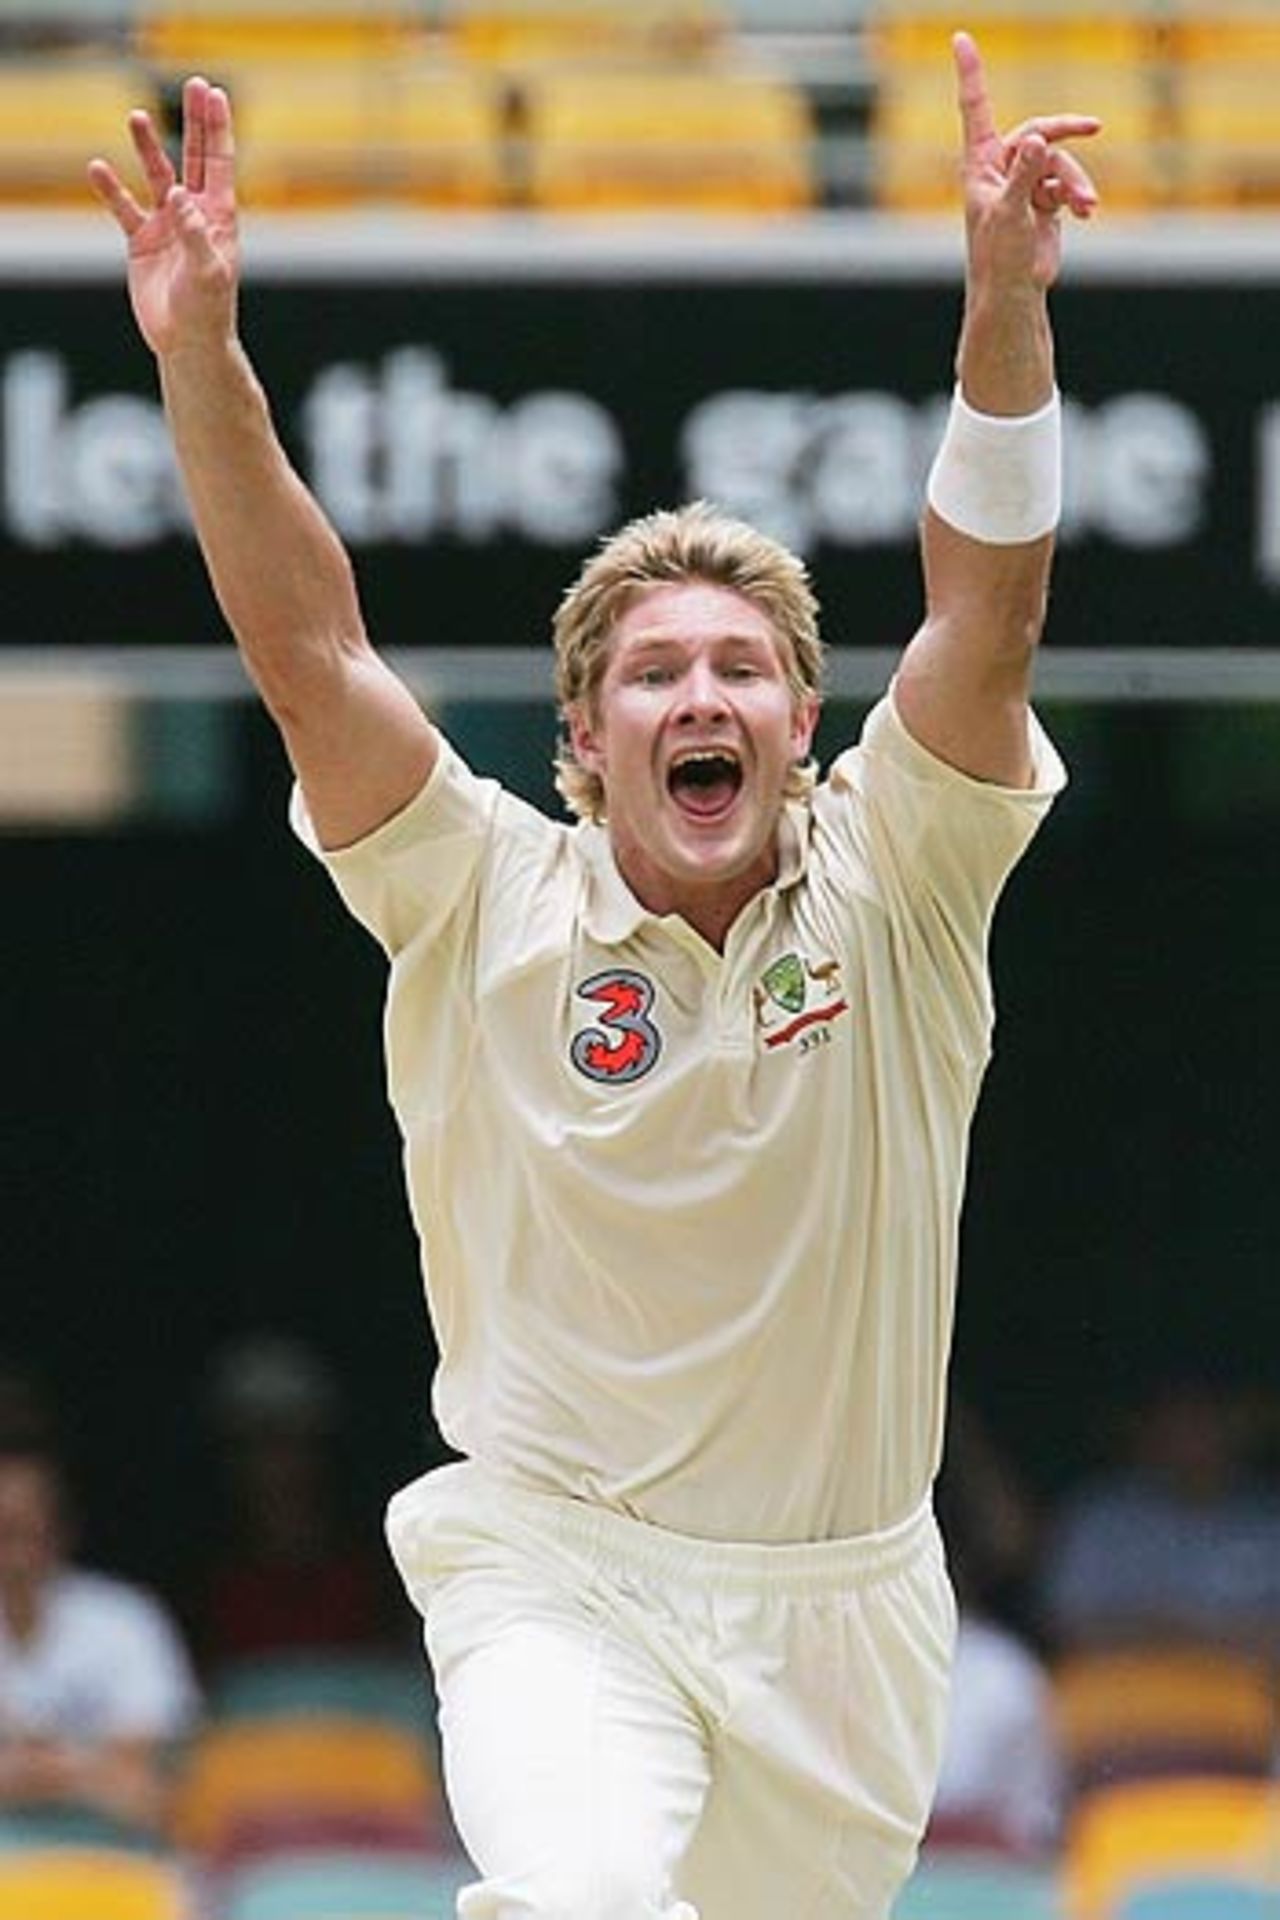 Shane Watson celebrates after taking his second Test wicket, 1st Test, Brisbane, 4th day, November 5, 2005